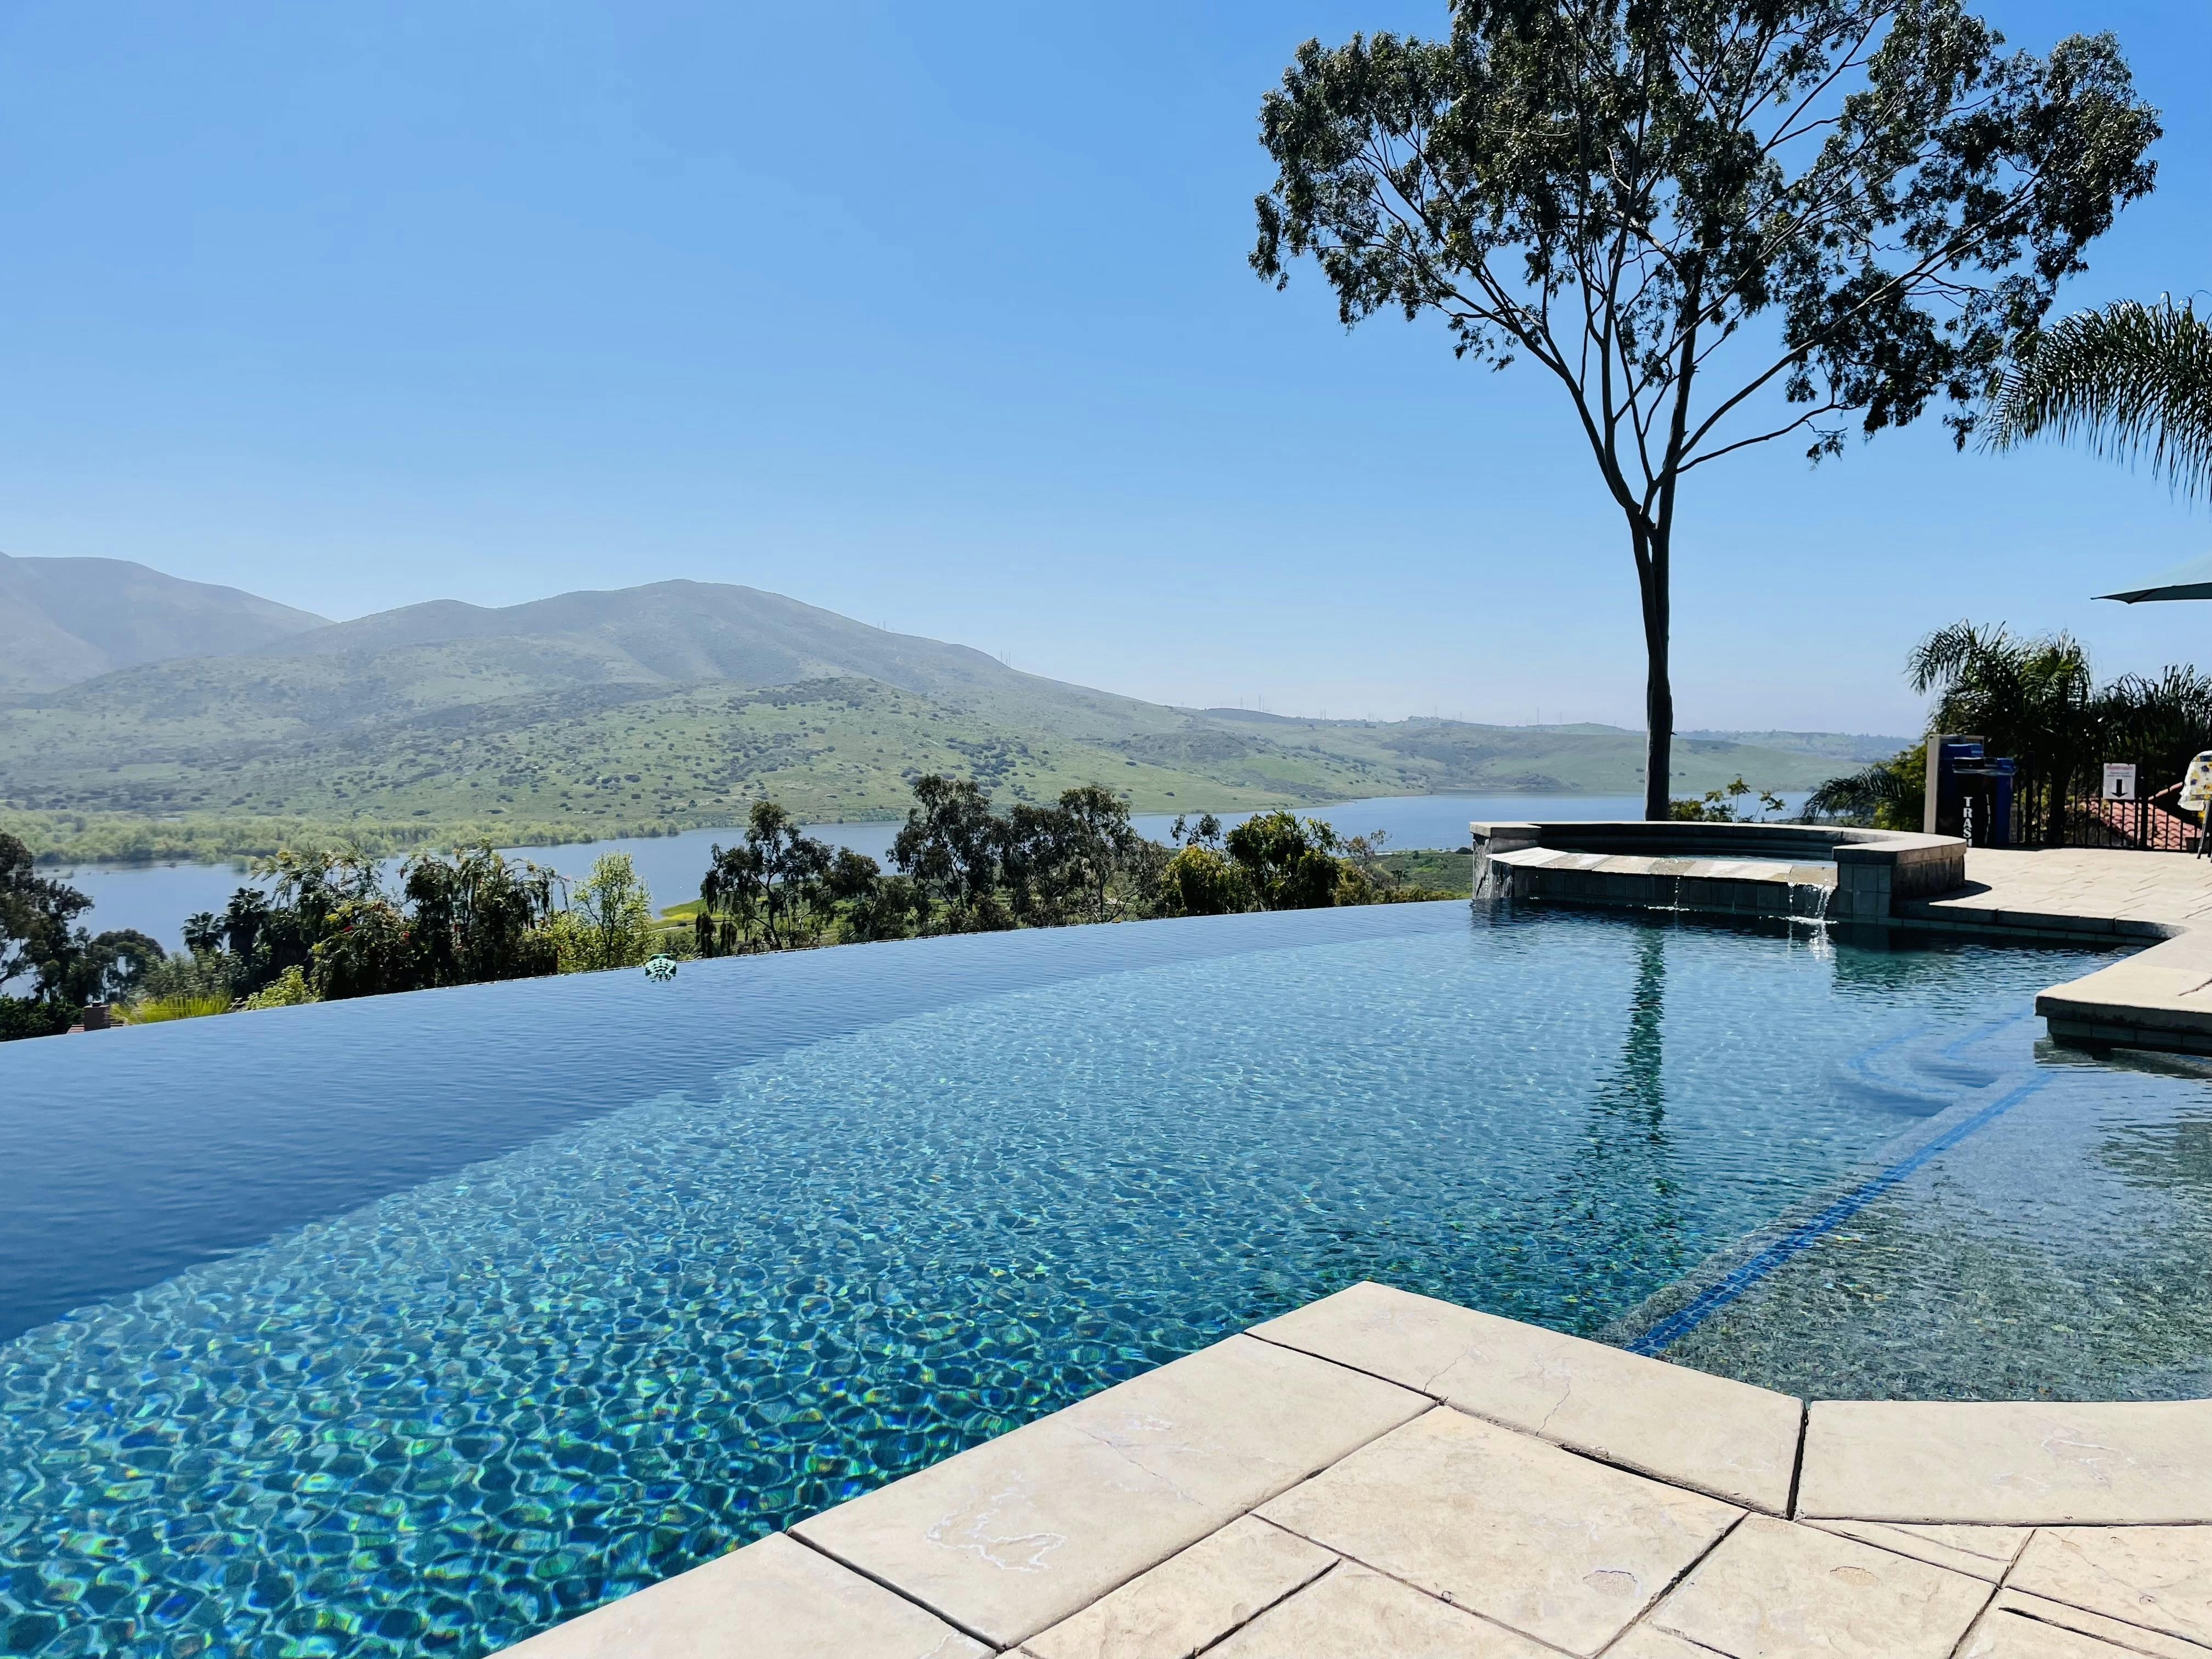 Infinity Edge Pool: What Is It and How to Get One